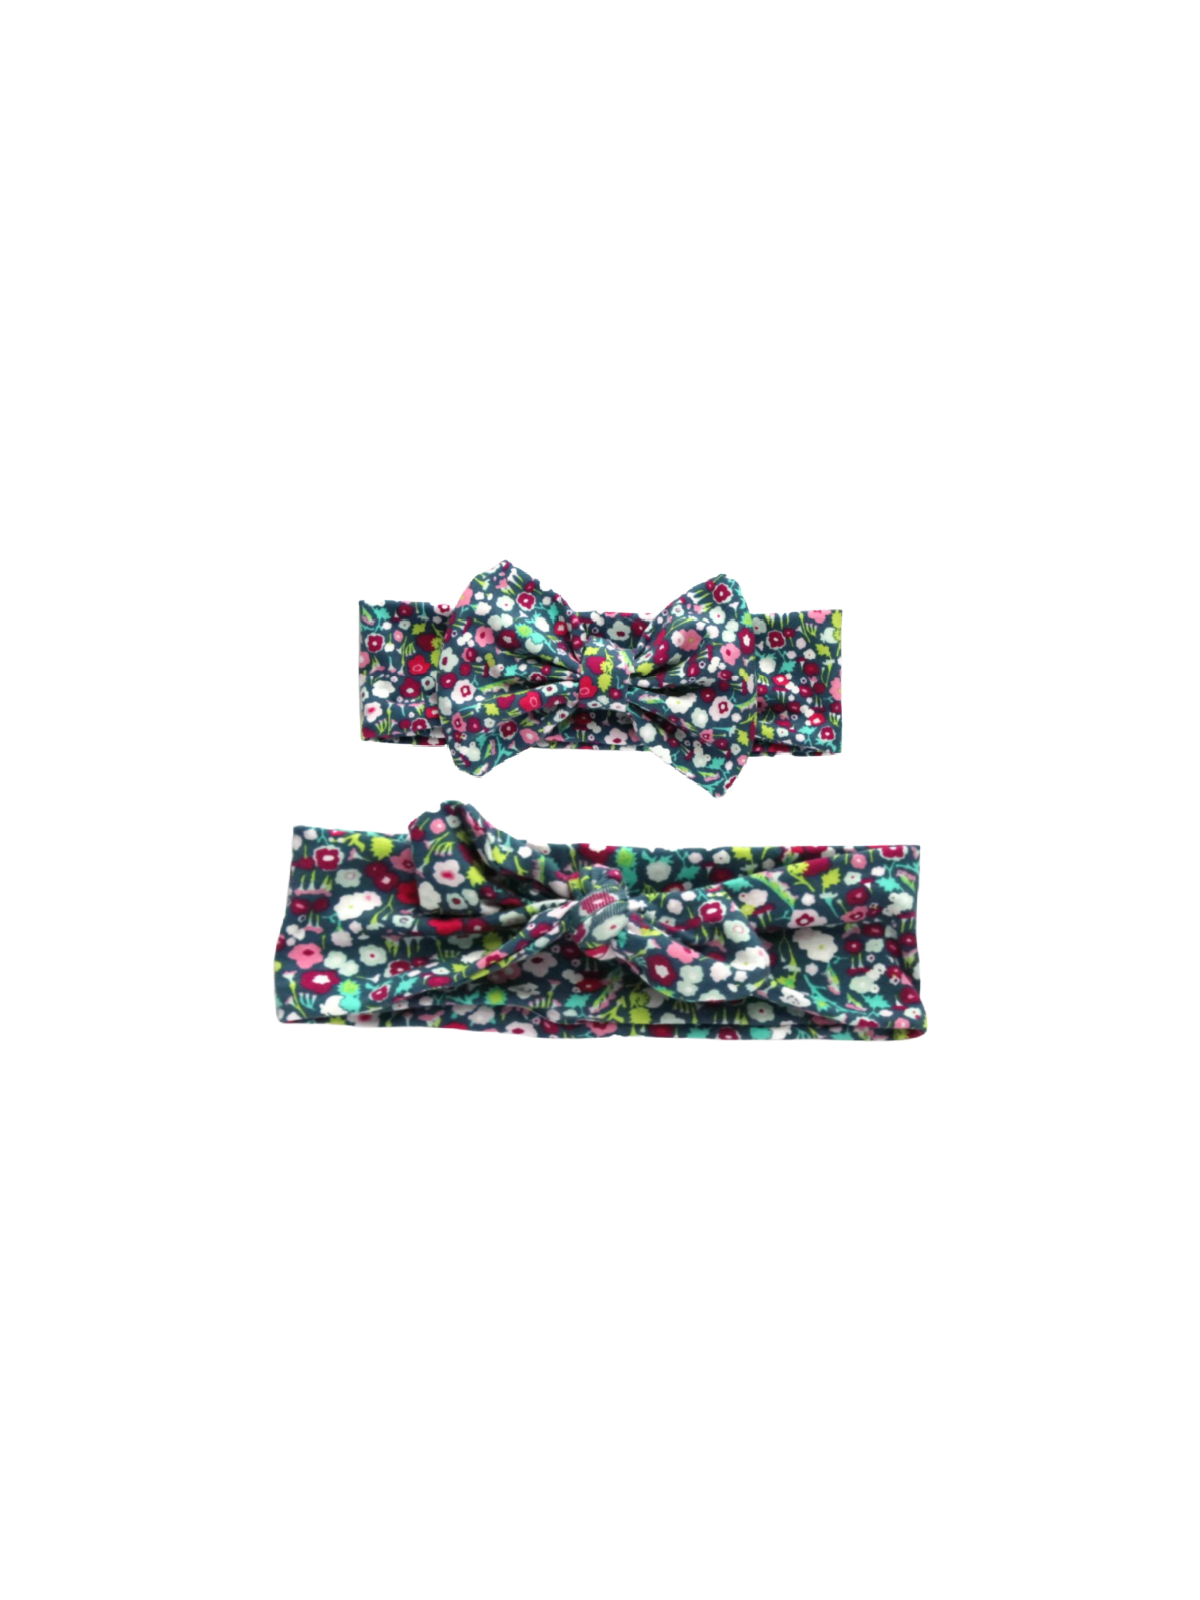 Flower Power Floral Mommy and Me Headbands Set